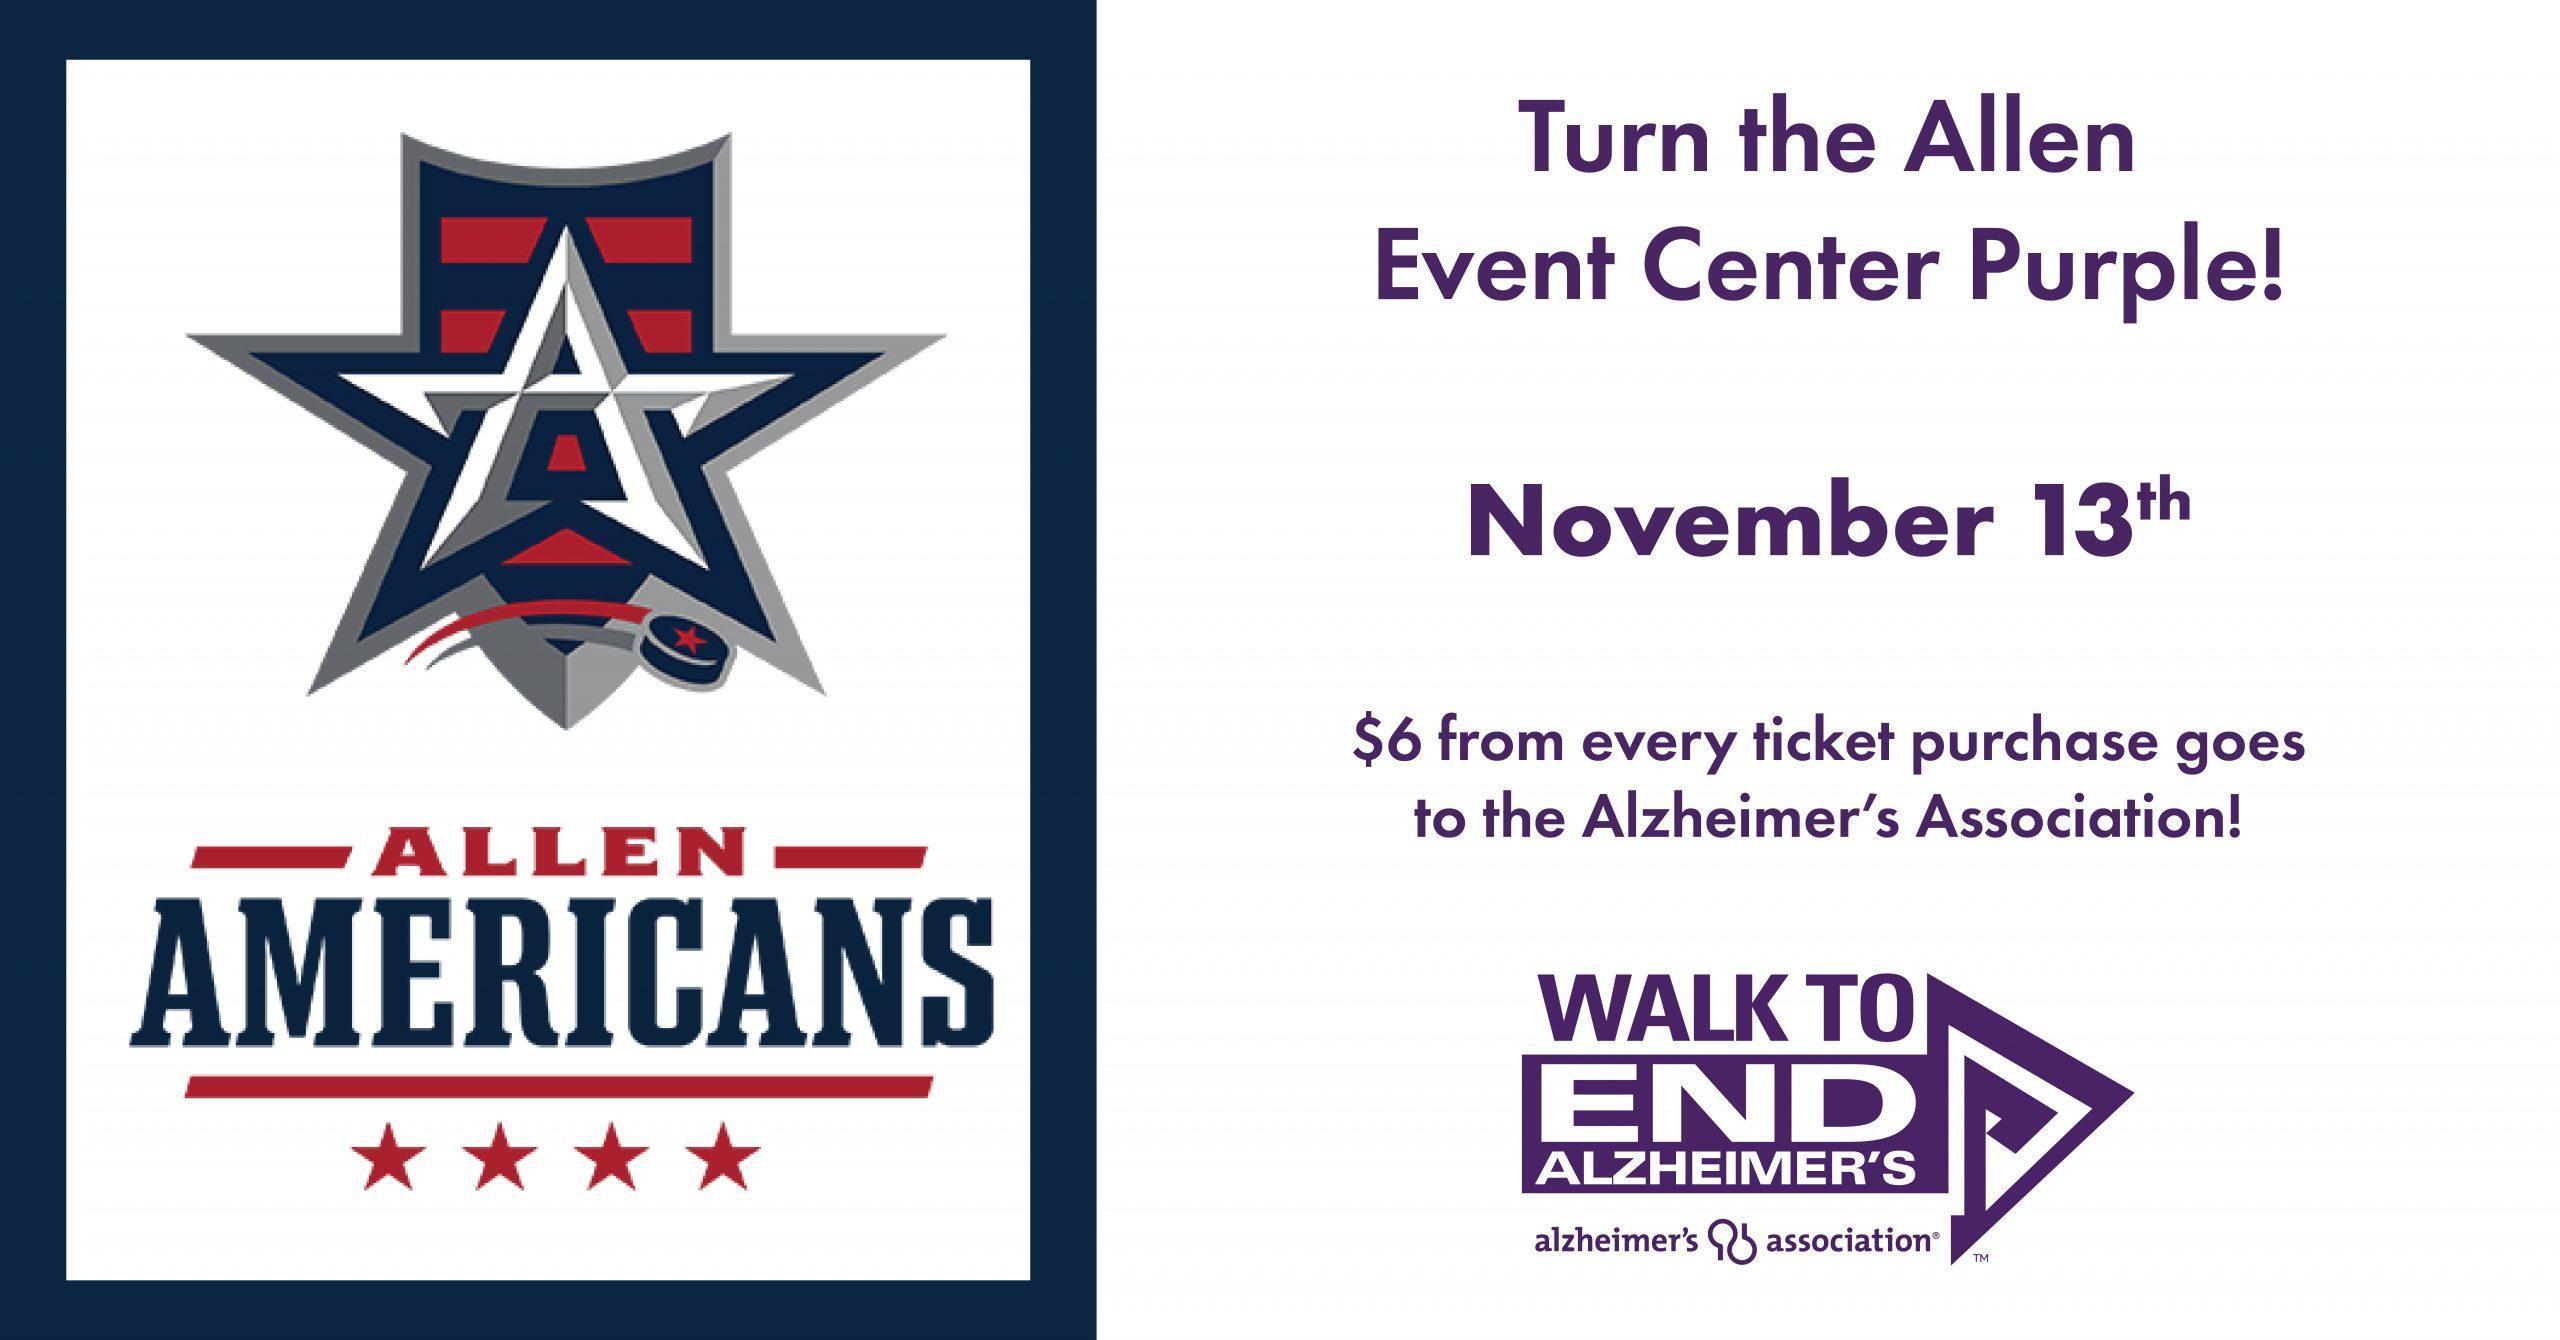 Blue background with Allen Americans Logo. Other half of image has purple text that says Turn the Allen Event Center Purple. November 13th. $6 from every ticket purchase goes to the Alzheimer's Association. Walk to End Alzheimer's logo.